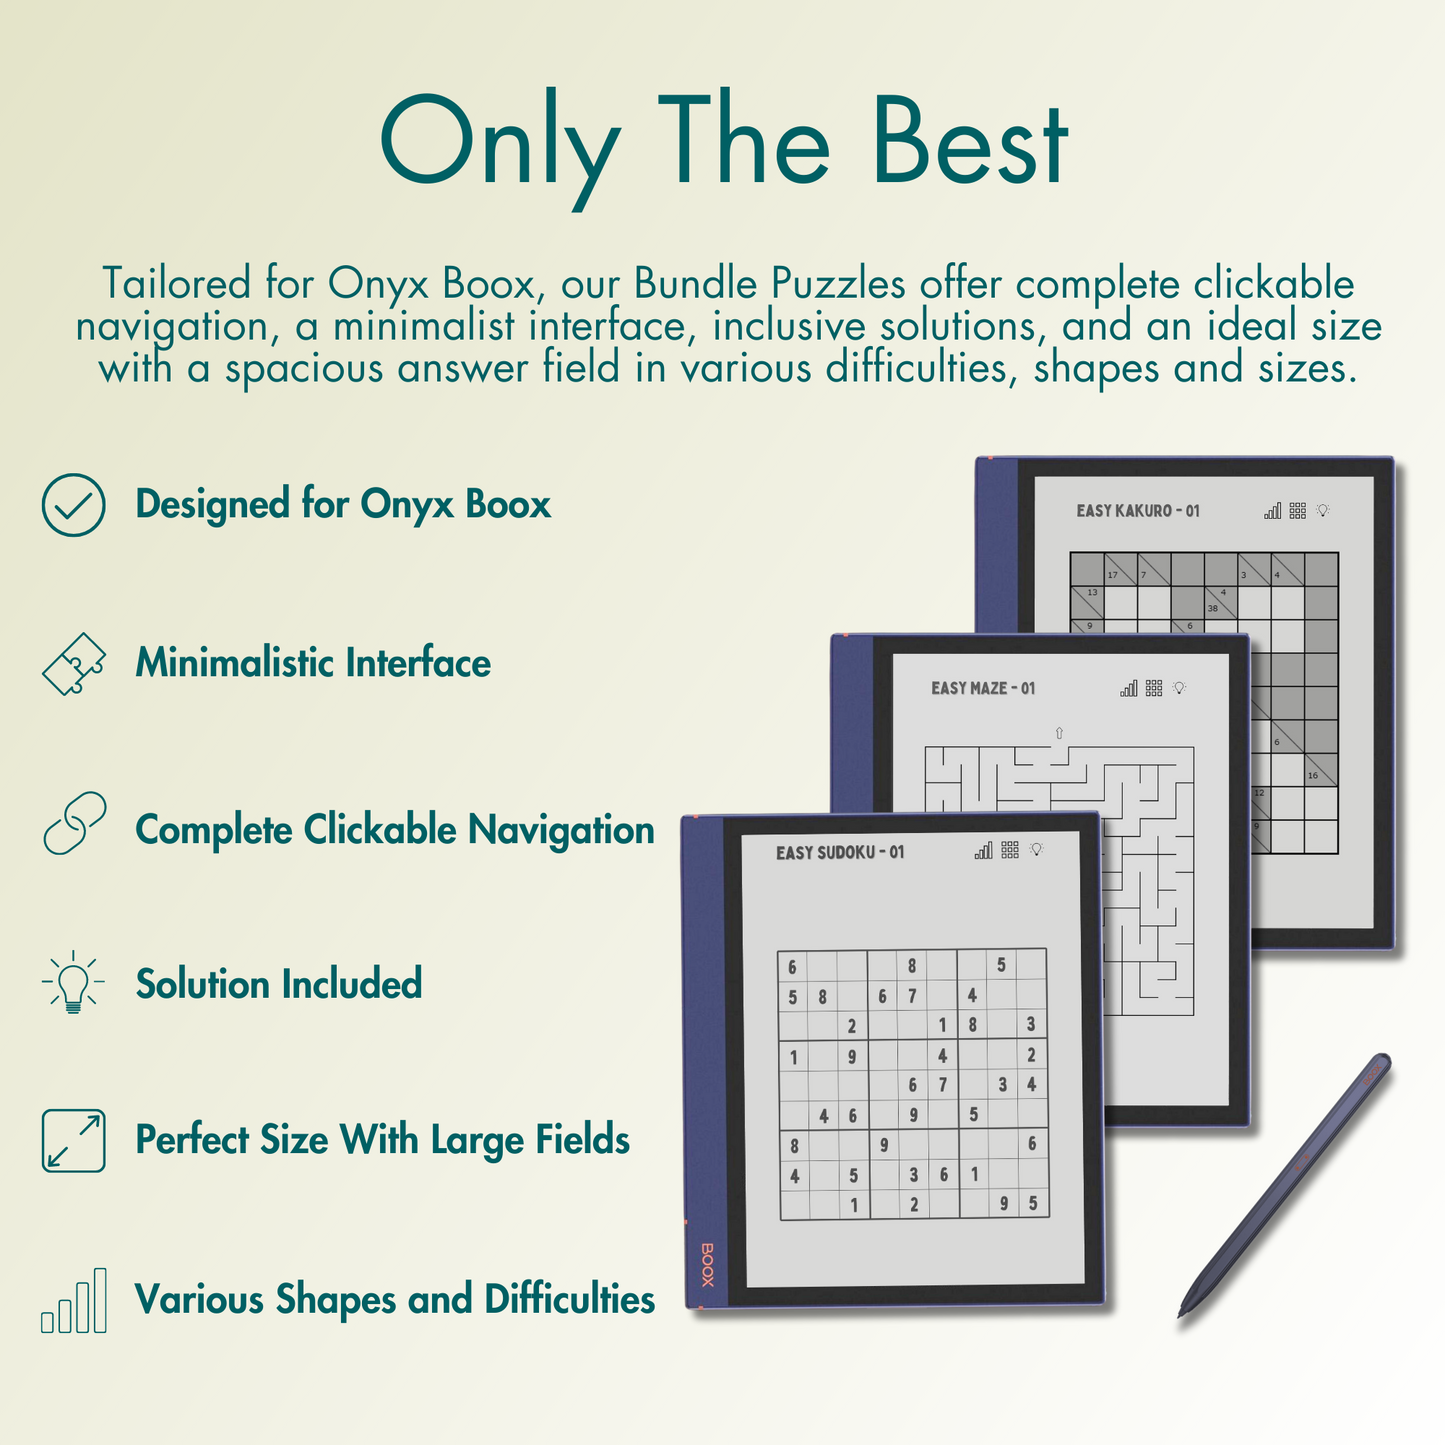 The Bundle offer complete clickable navigation, a minimalist interface, inclusive solutions, and an ideal size with a spacious answer field in various difficulties, shapes and sizes for Onyx Boox e-ink screen.